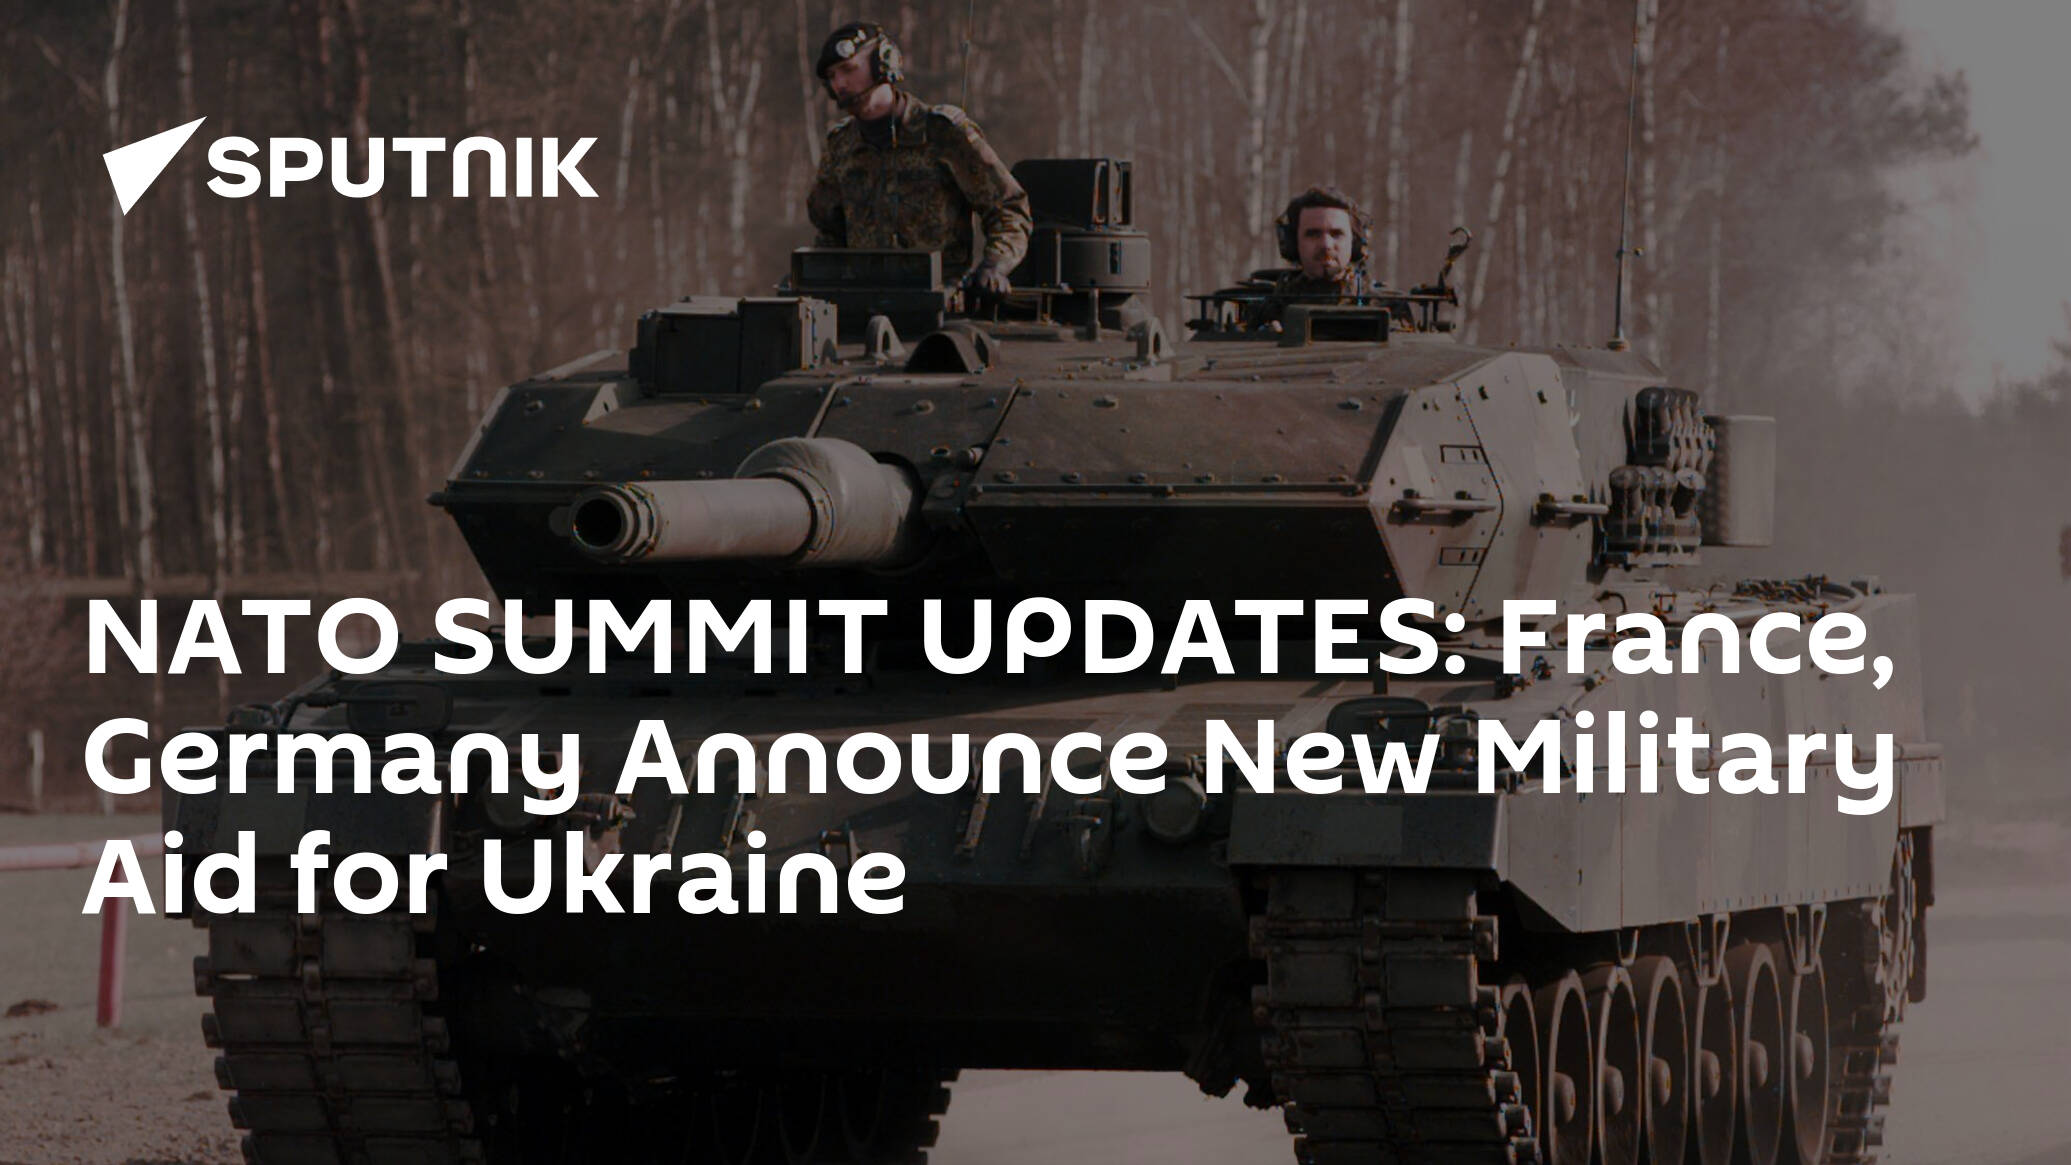 NATO SUMMIT UPDATES: France, Germany Announce New Military Aid for Ukraine